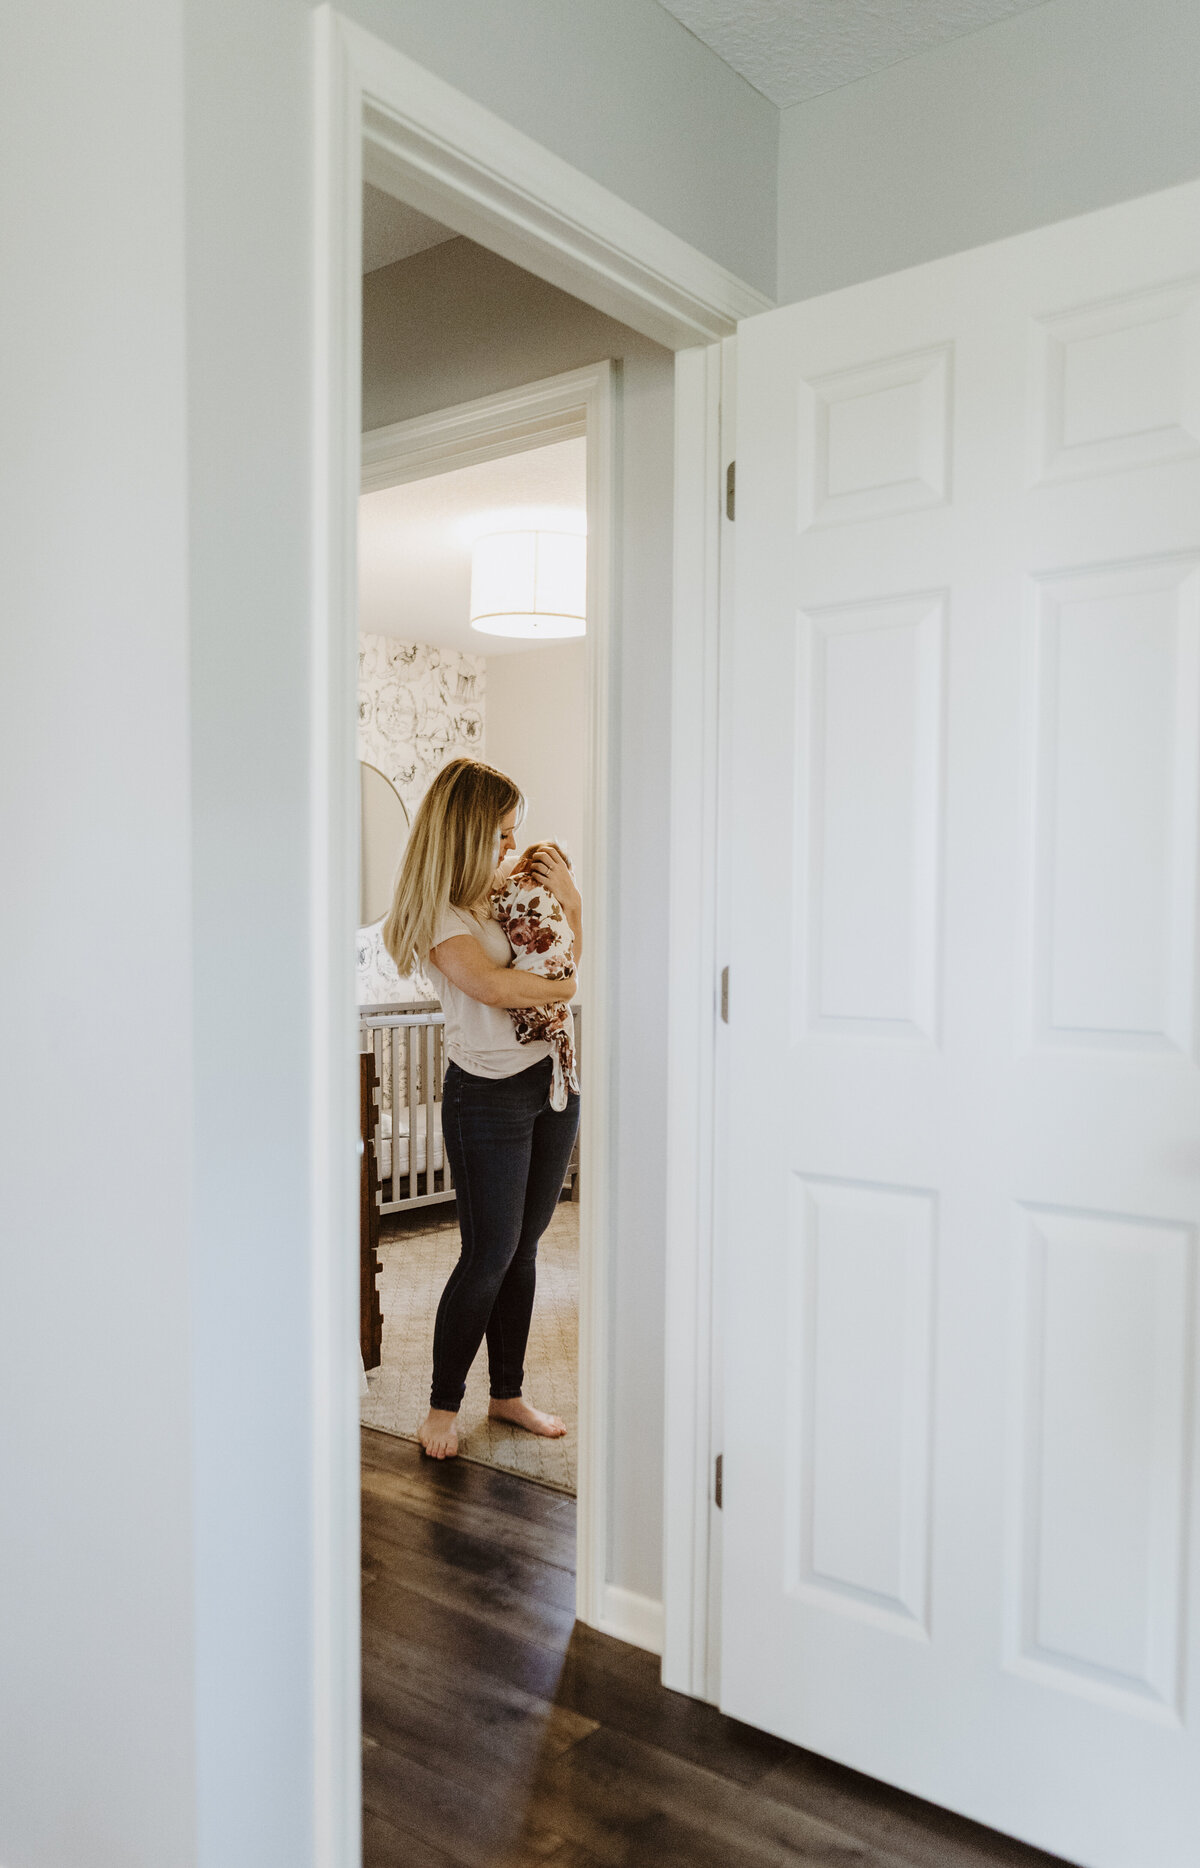 Witness love in bloom with St. Paul newborn photography at home. Shannon Kathleen Photography captures the essence of blossoming love in your family space